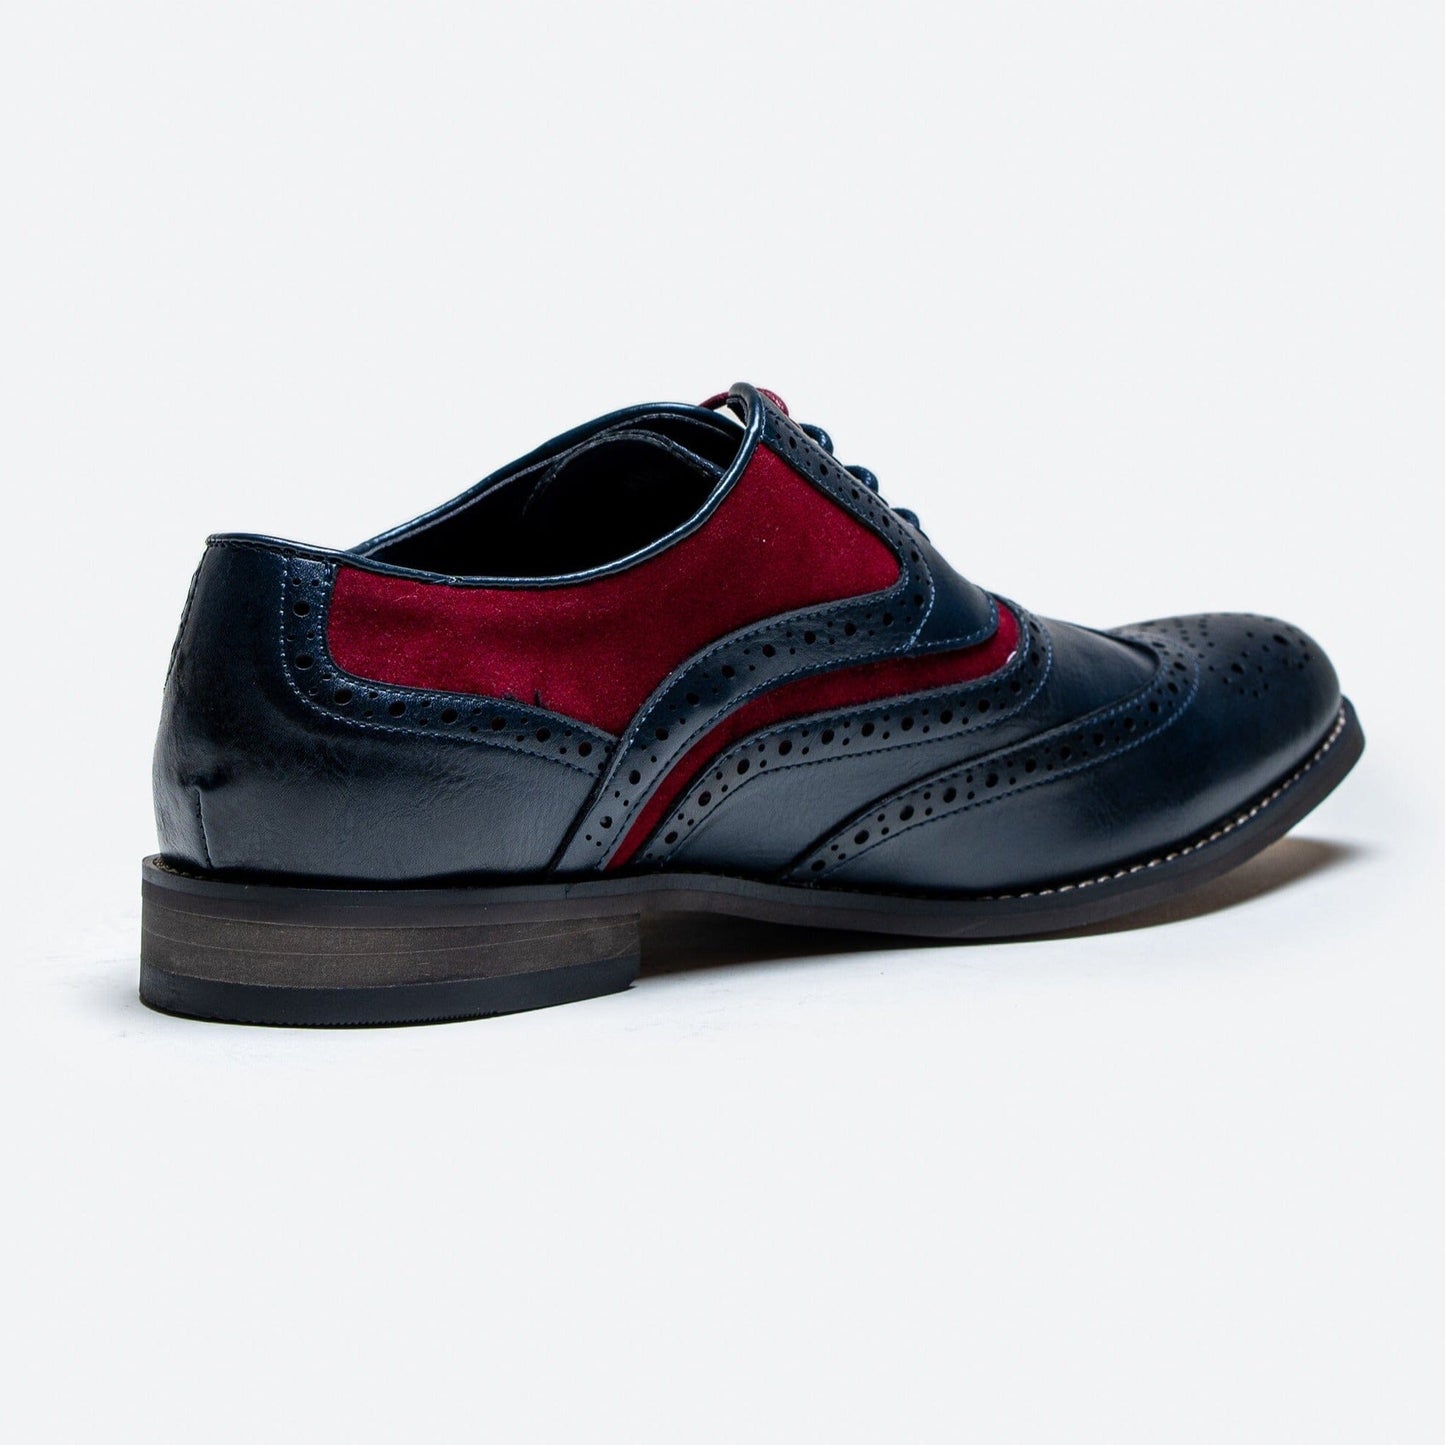 Russel Navy & Red Brogue Shoes - Shoes - - THREADPEPPER